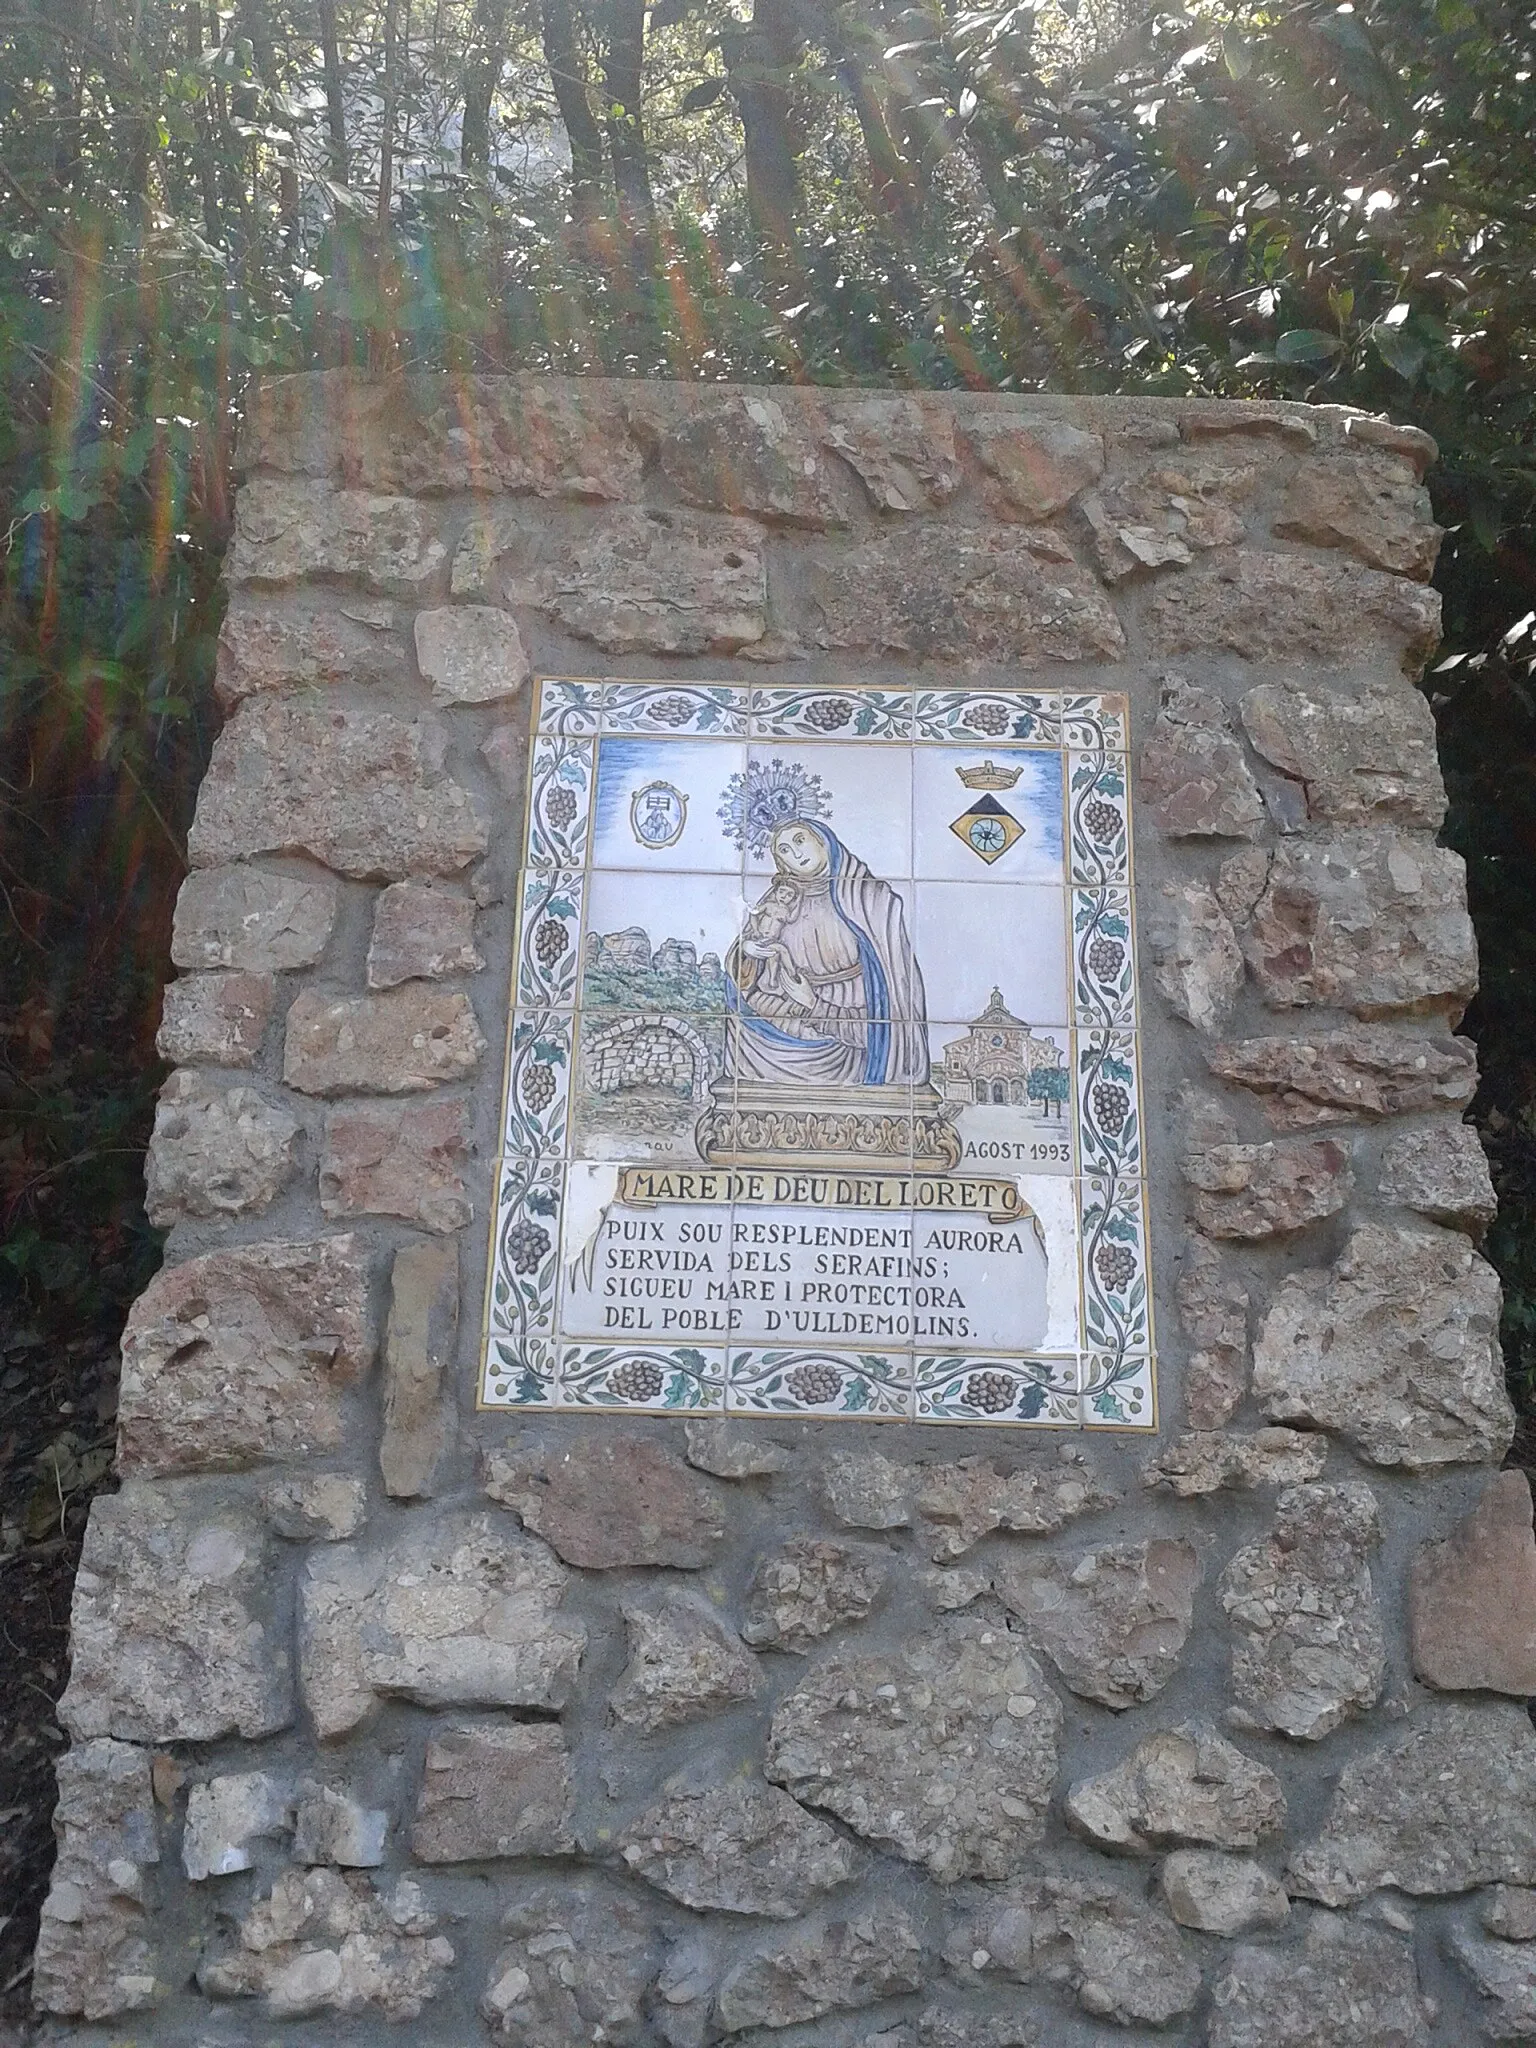 Photo showing: Decorated tiles in Camí dels Degotalls, Montserrat mountain, Catalonia